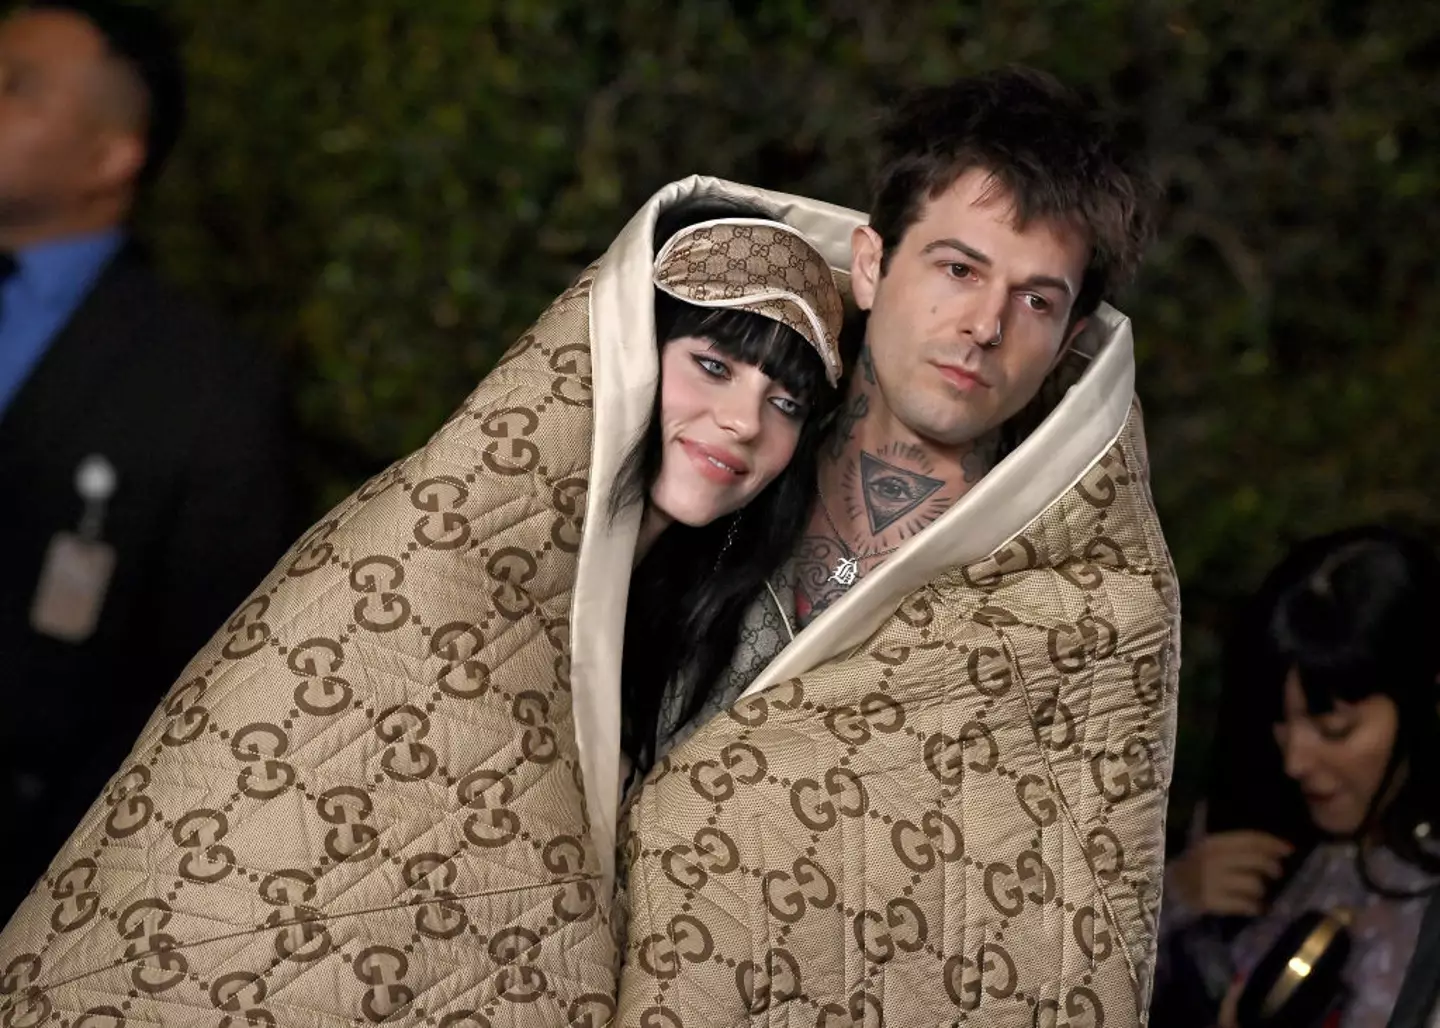 Billie Eilish and Jesse Rutherford appeared to poke fun at their age difference. (Axelle/Bauer-Griffin/FilmMagic)